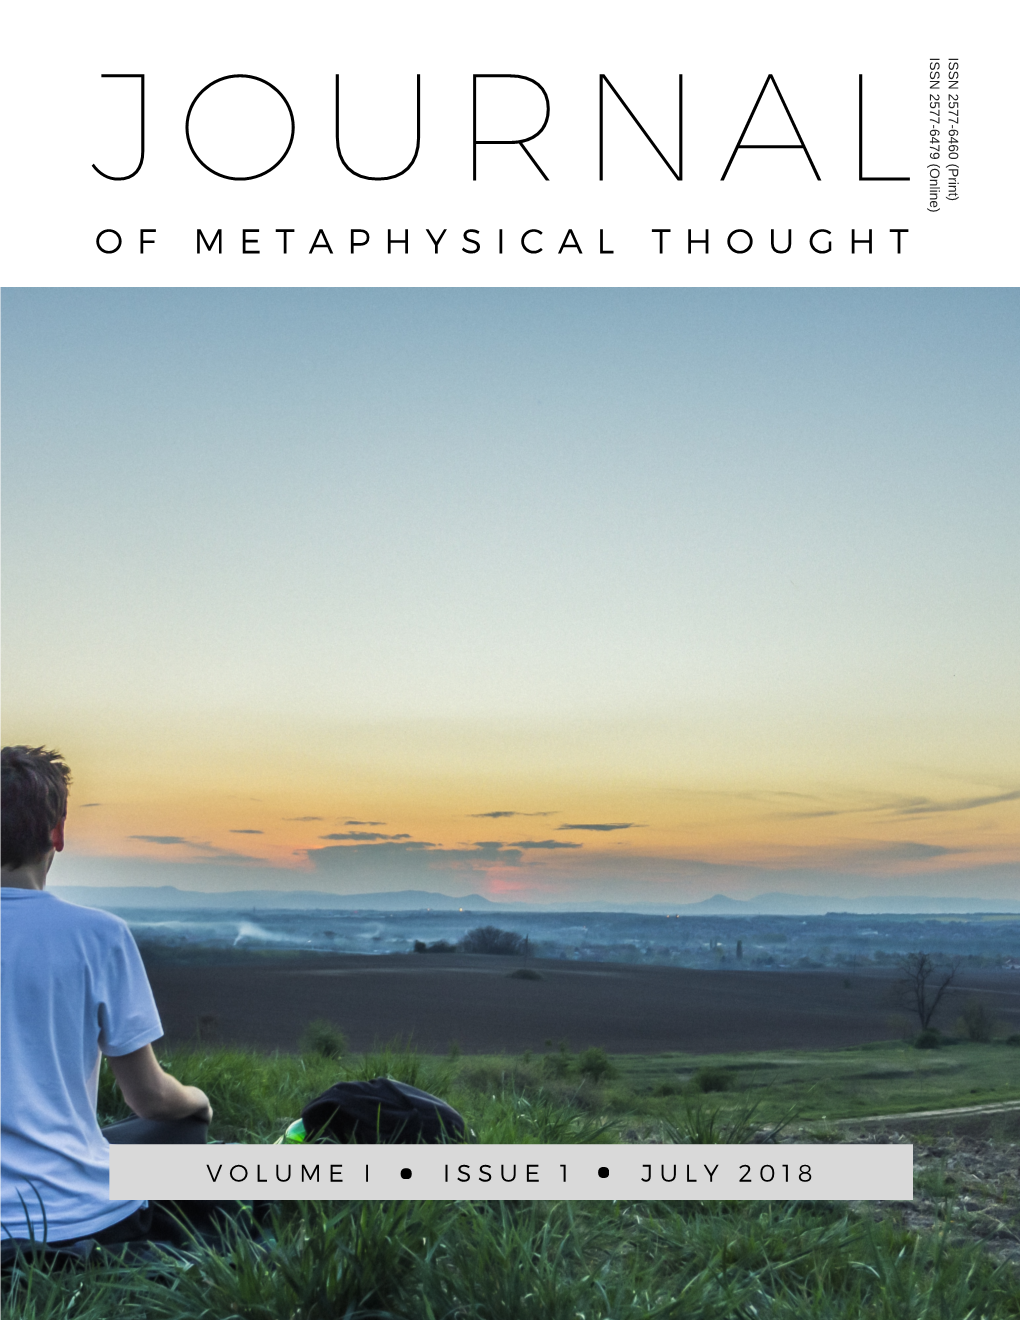 Journal of Metaphysical Thought